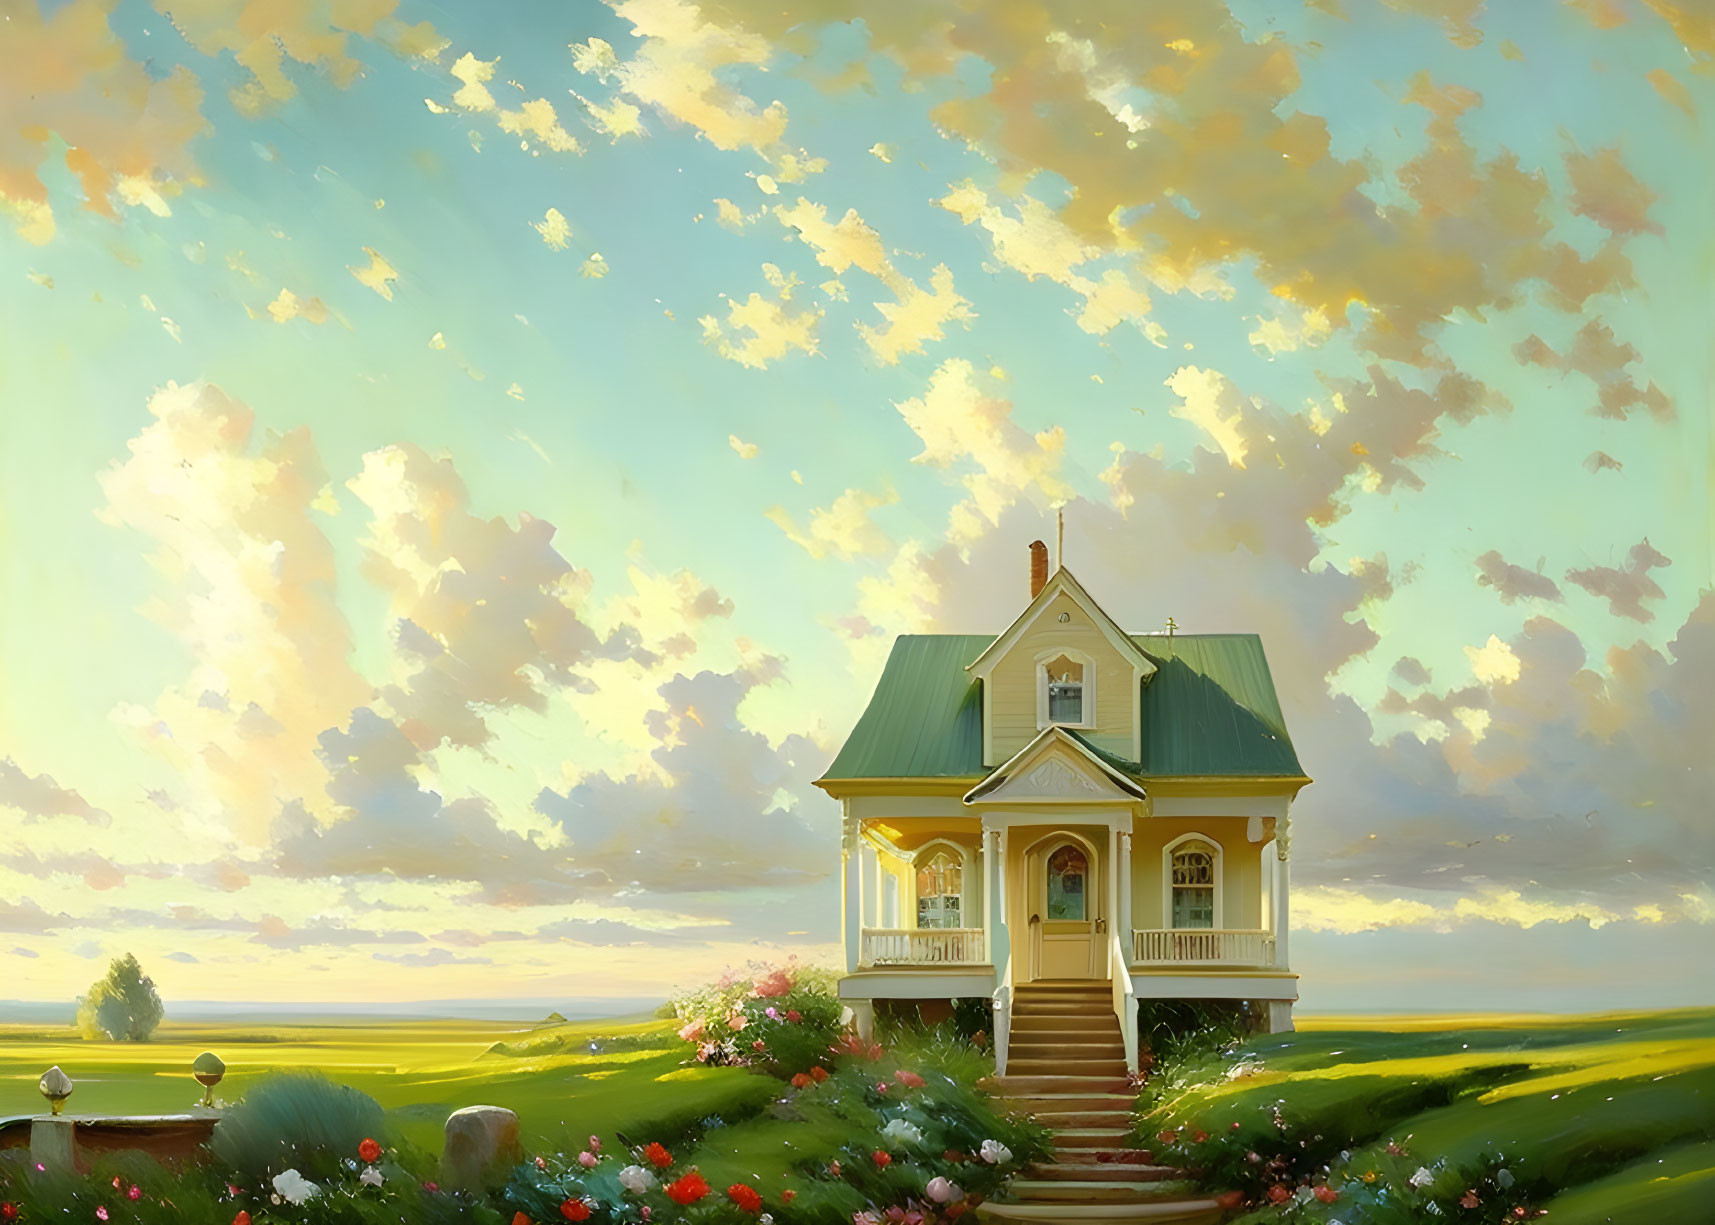 Yellow house with green roof in lush field under golden sky.